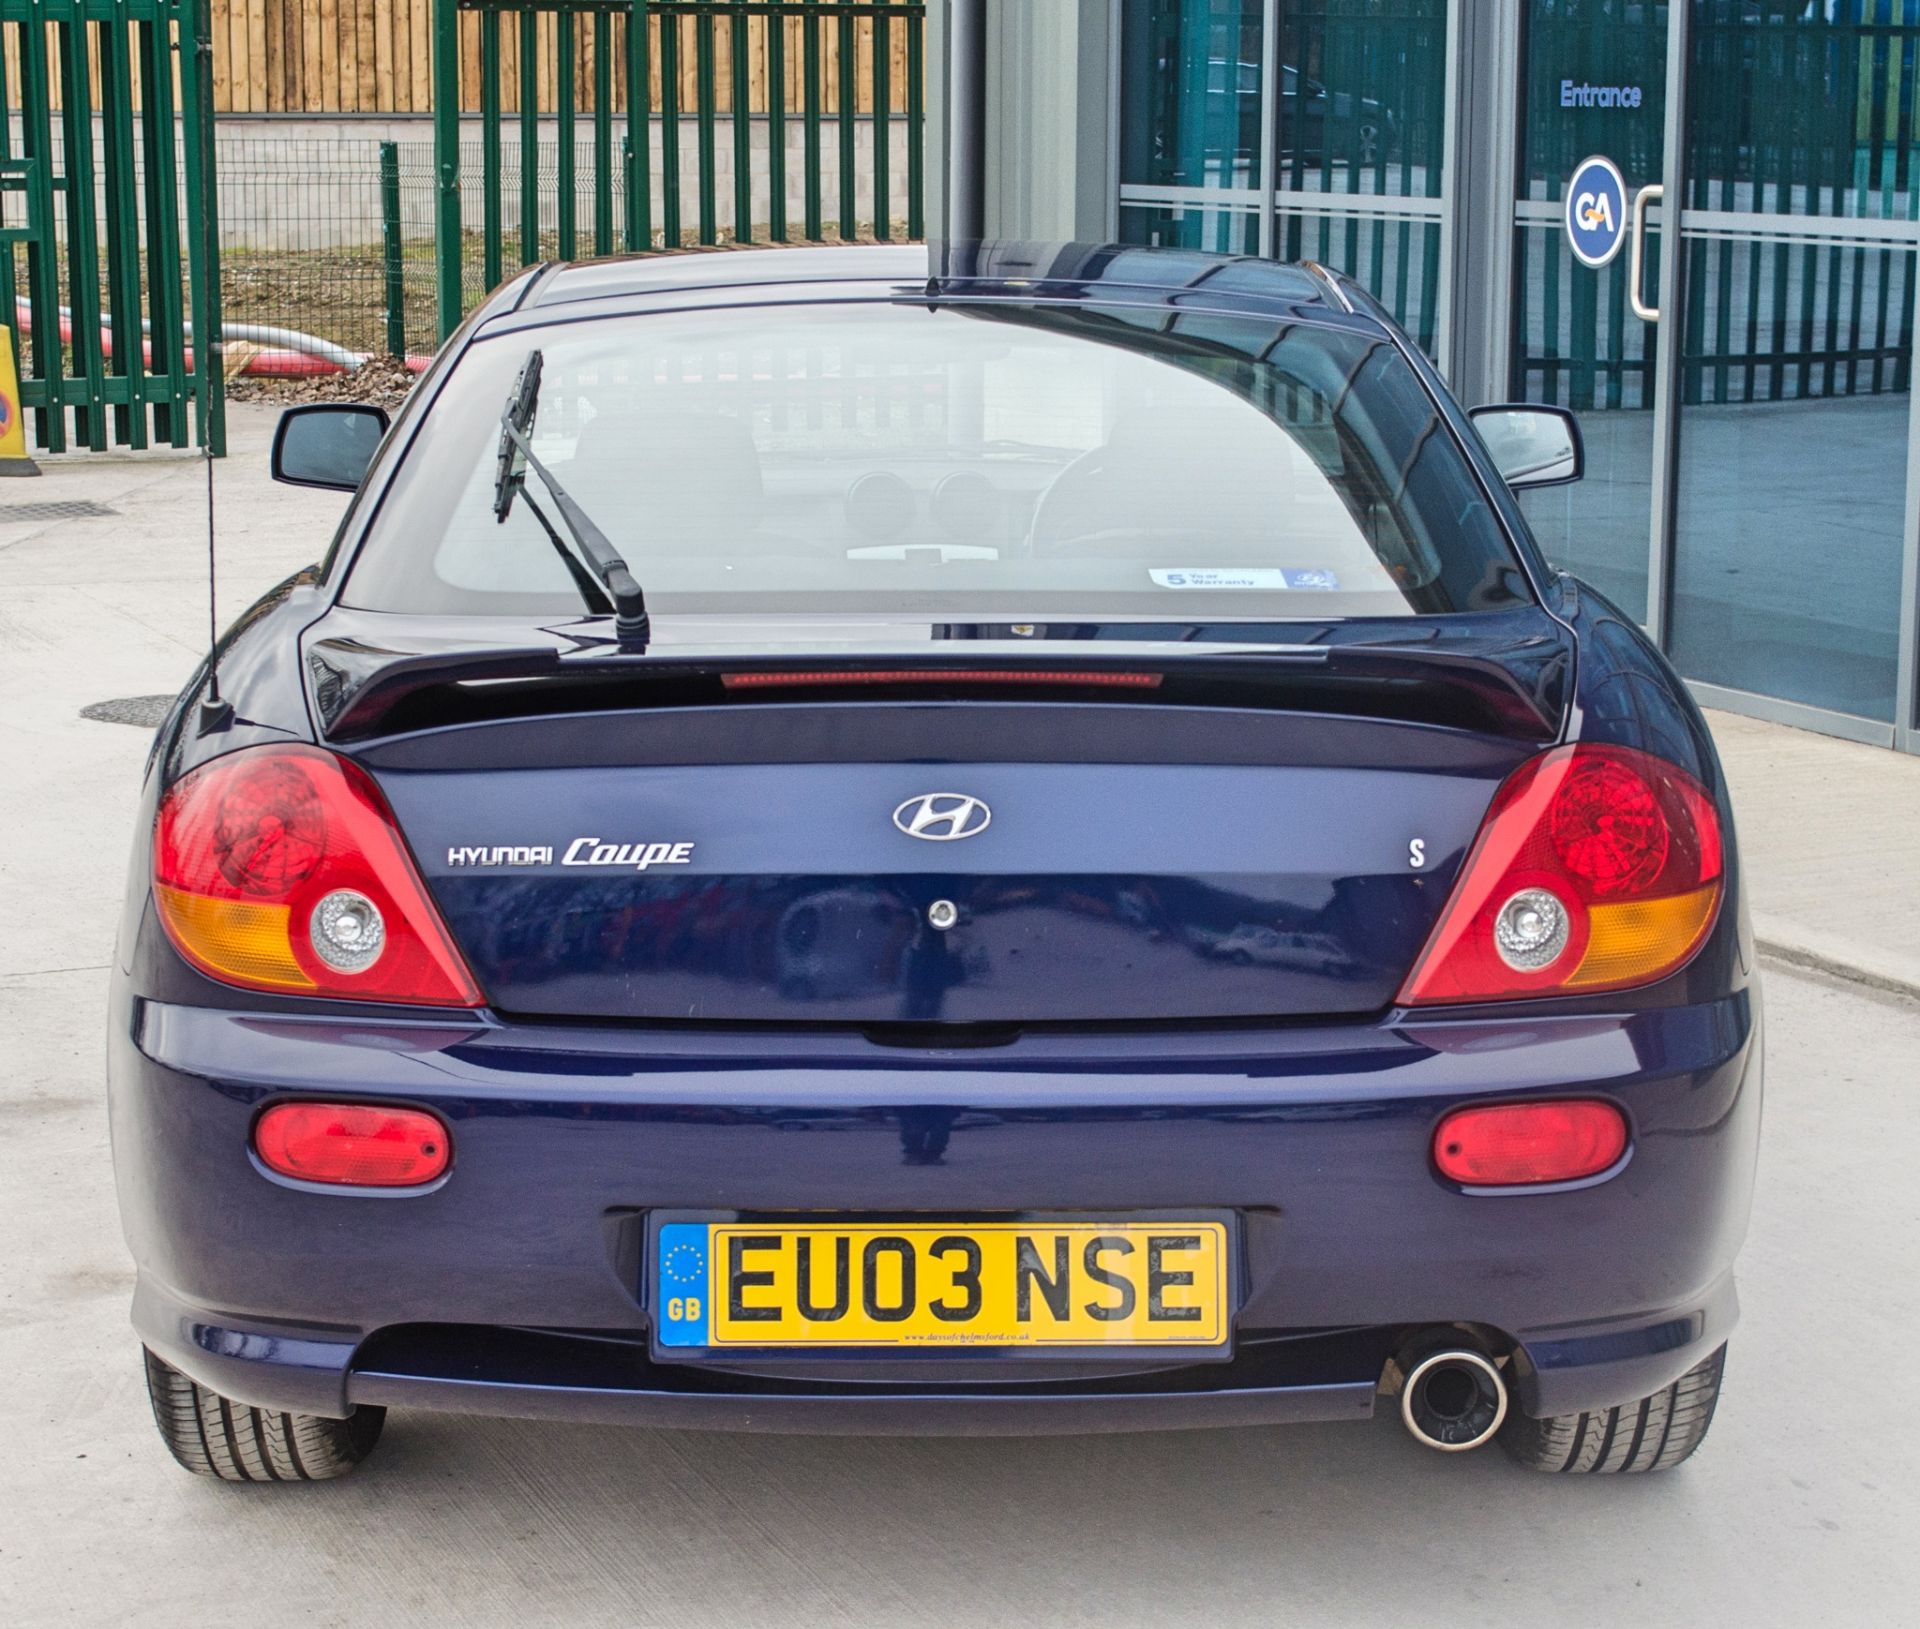 2003 Hyundai Coupe 1.6 S 1600 cc 3 door coupe - Image 12 of 56